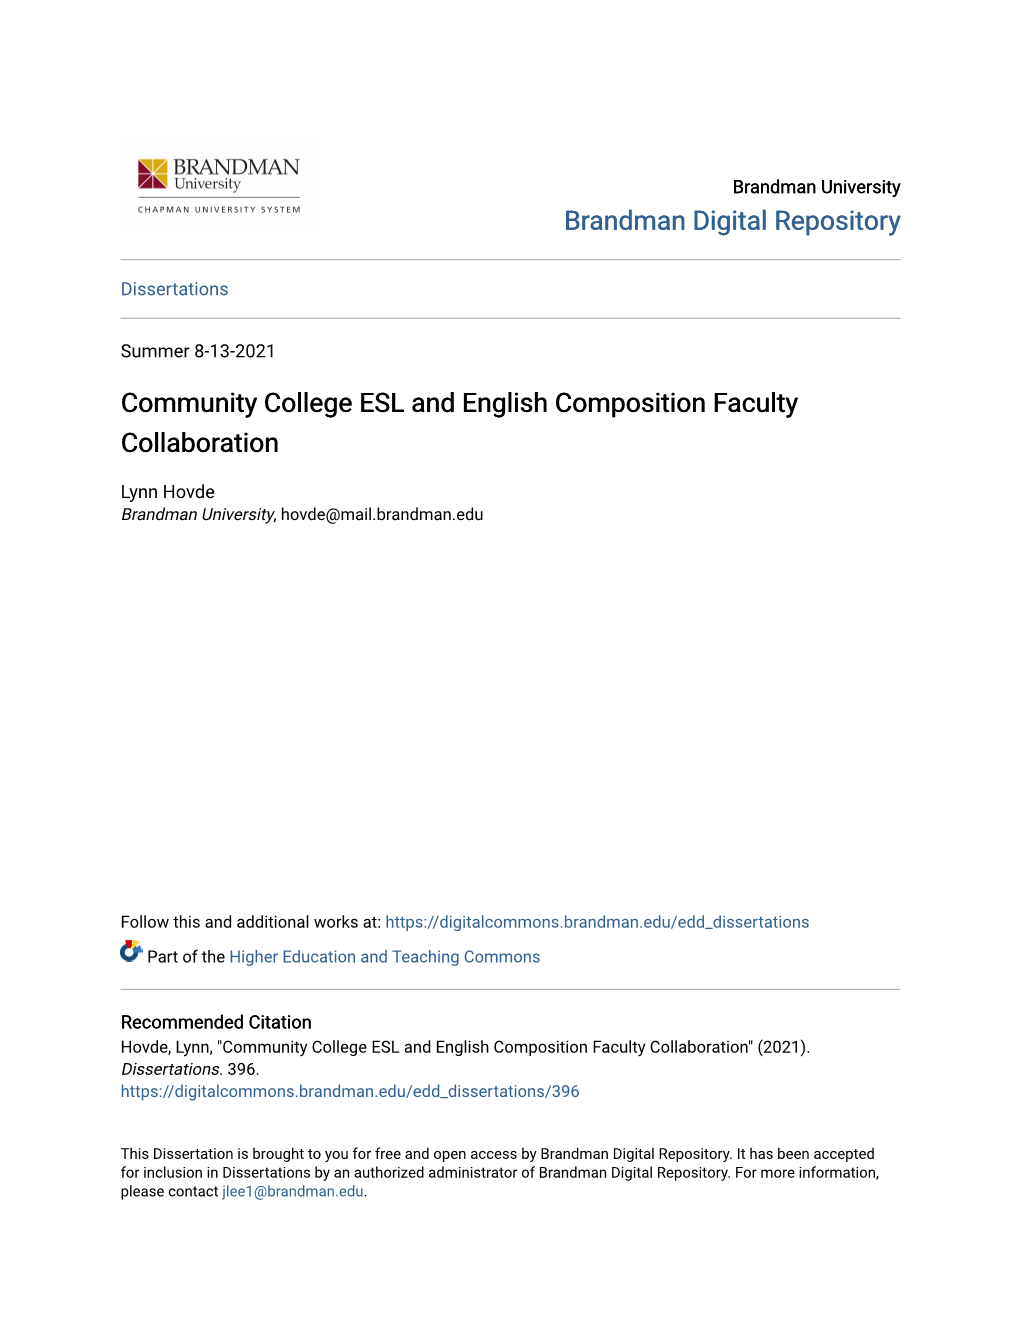 Community College ESL and English Composition Faculty Collaboration